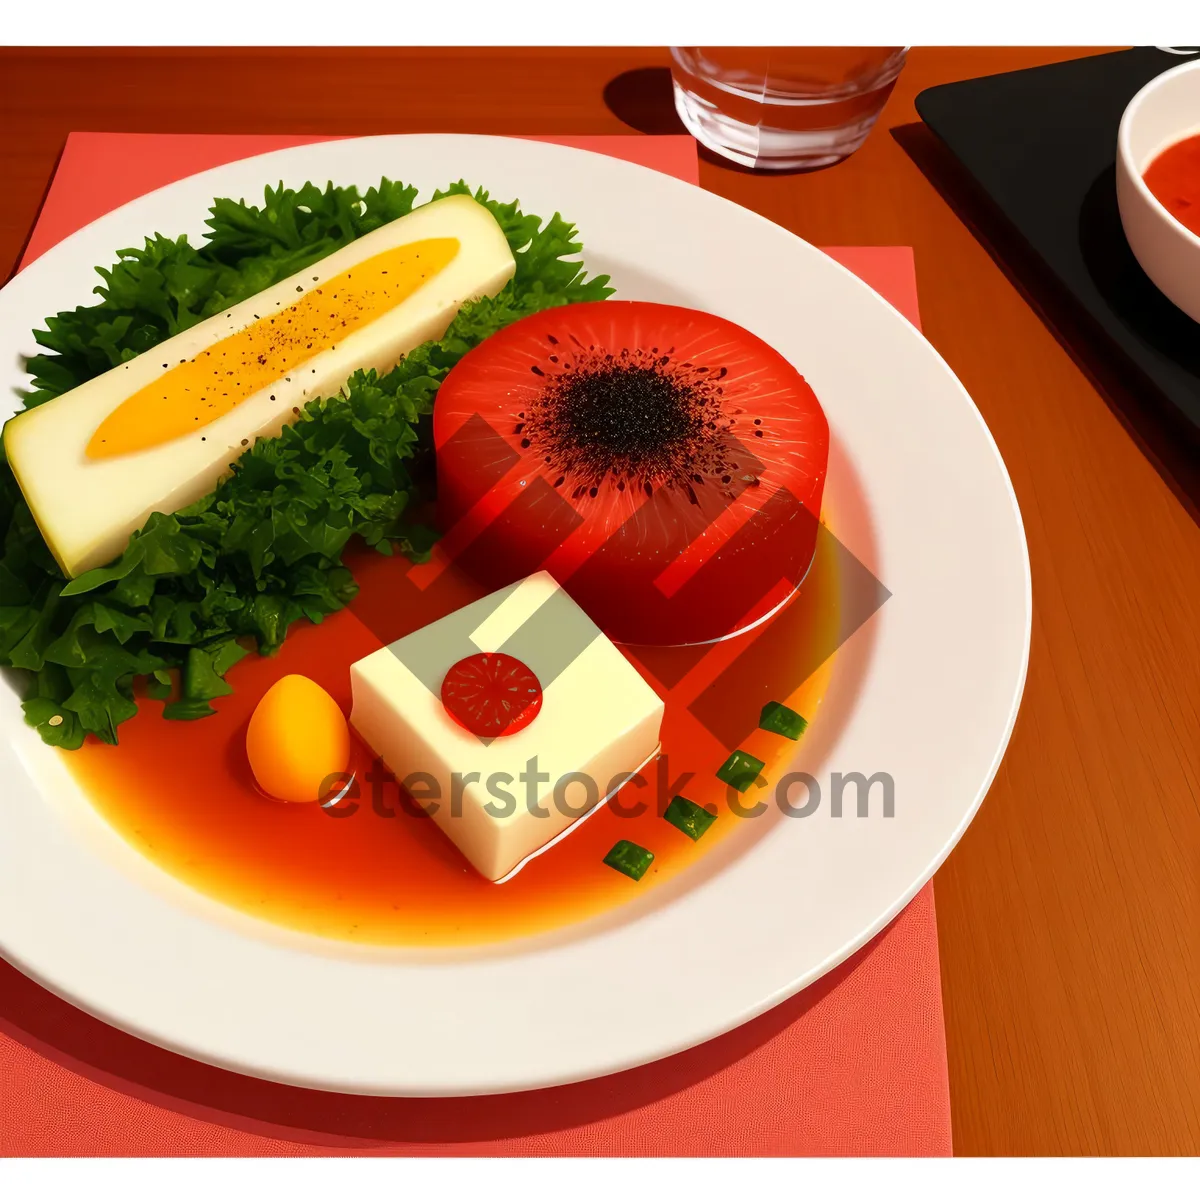 Picture of Gourmet Vegetable Salad with Fresh Tomato and Nutritious Dressing